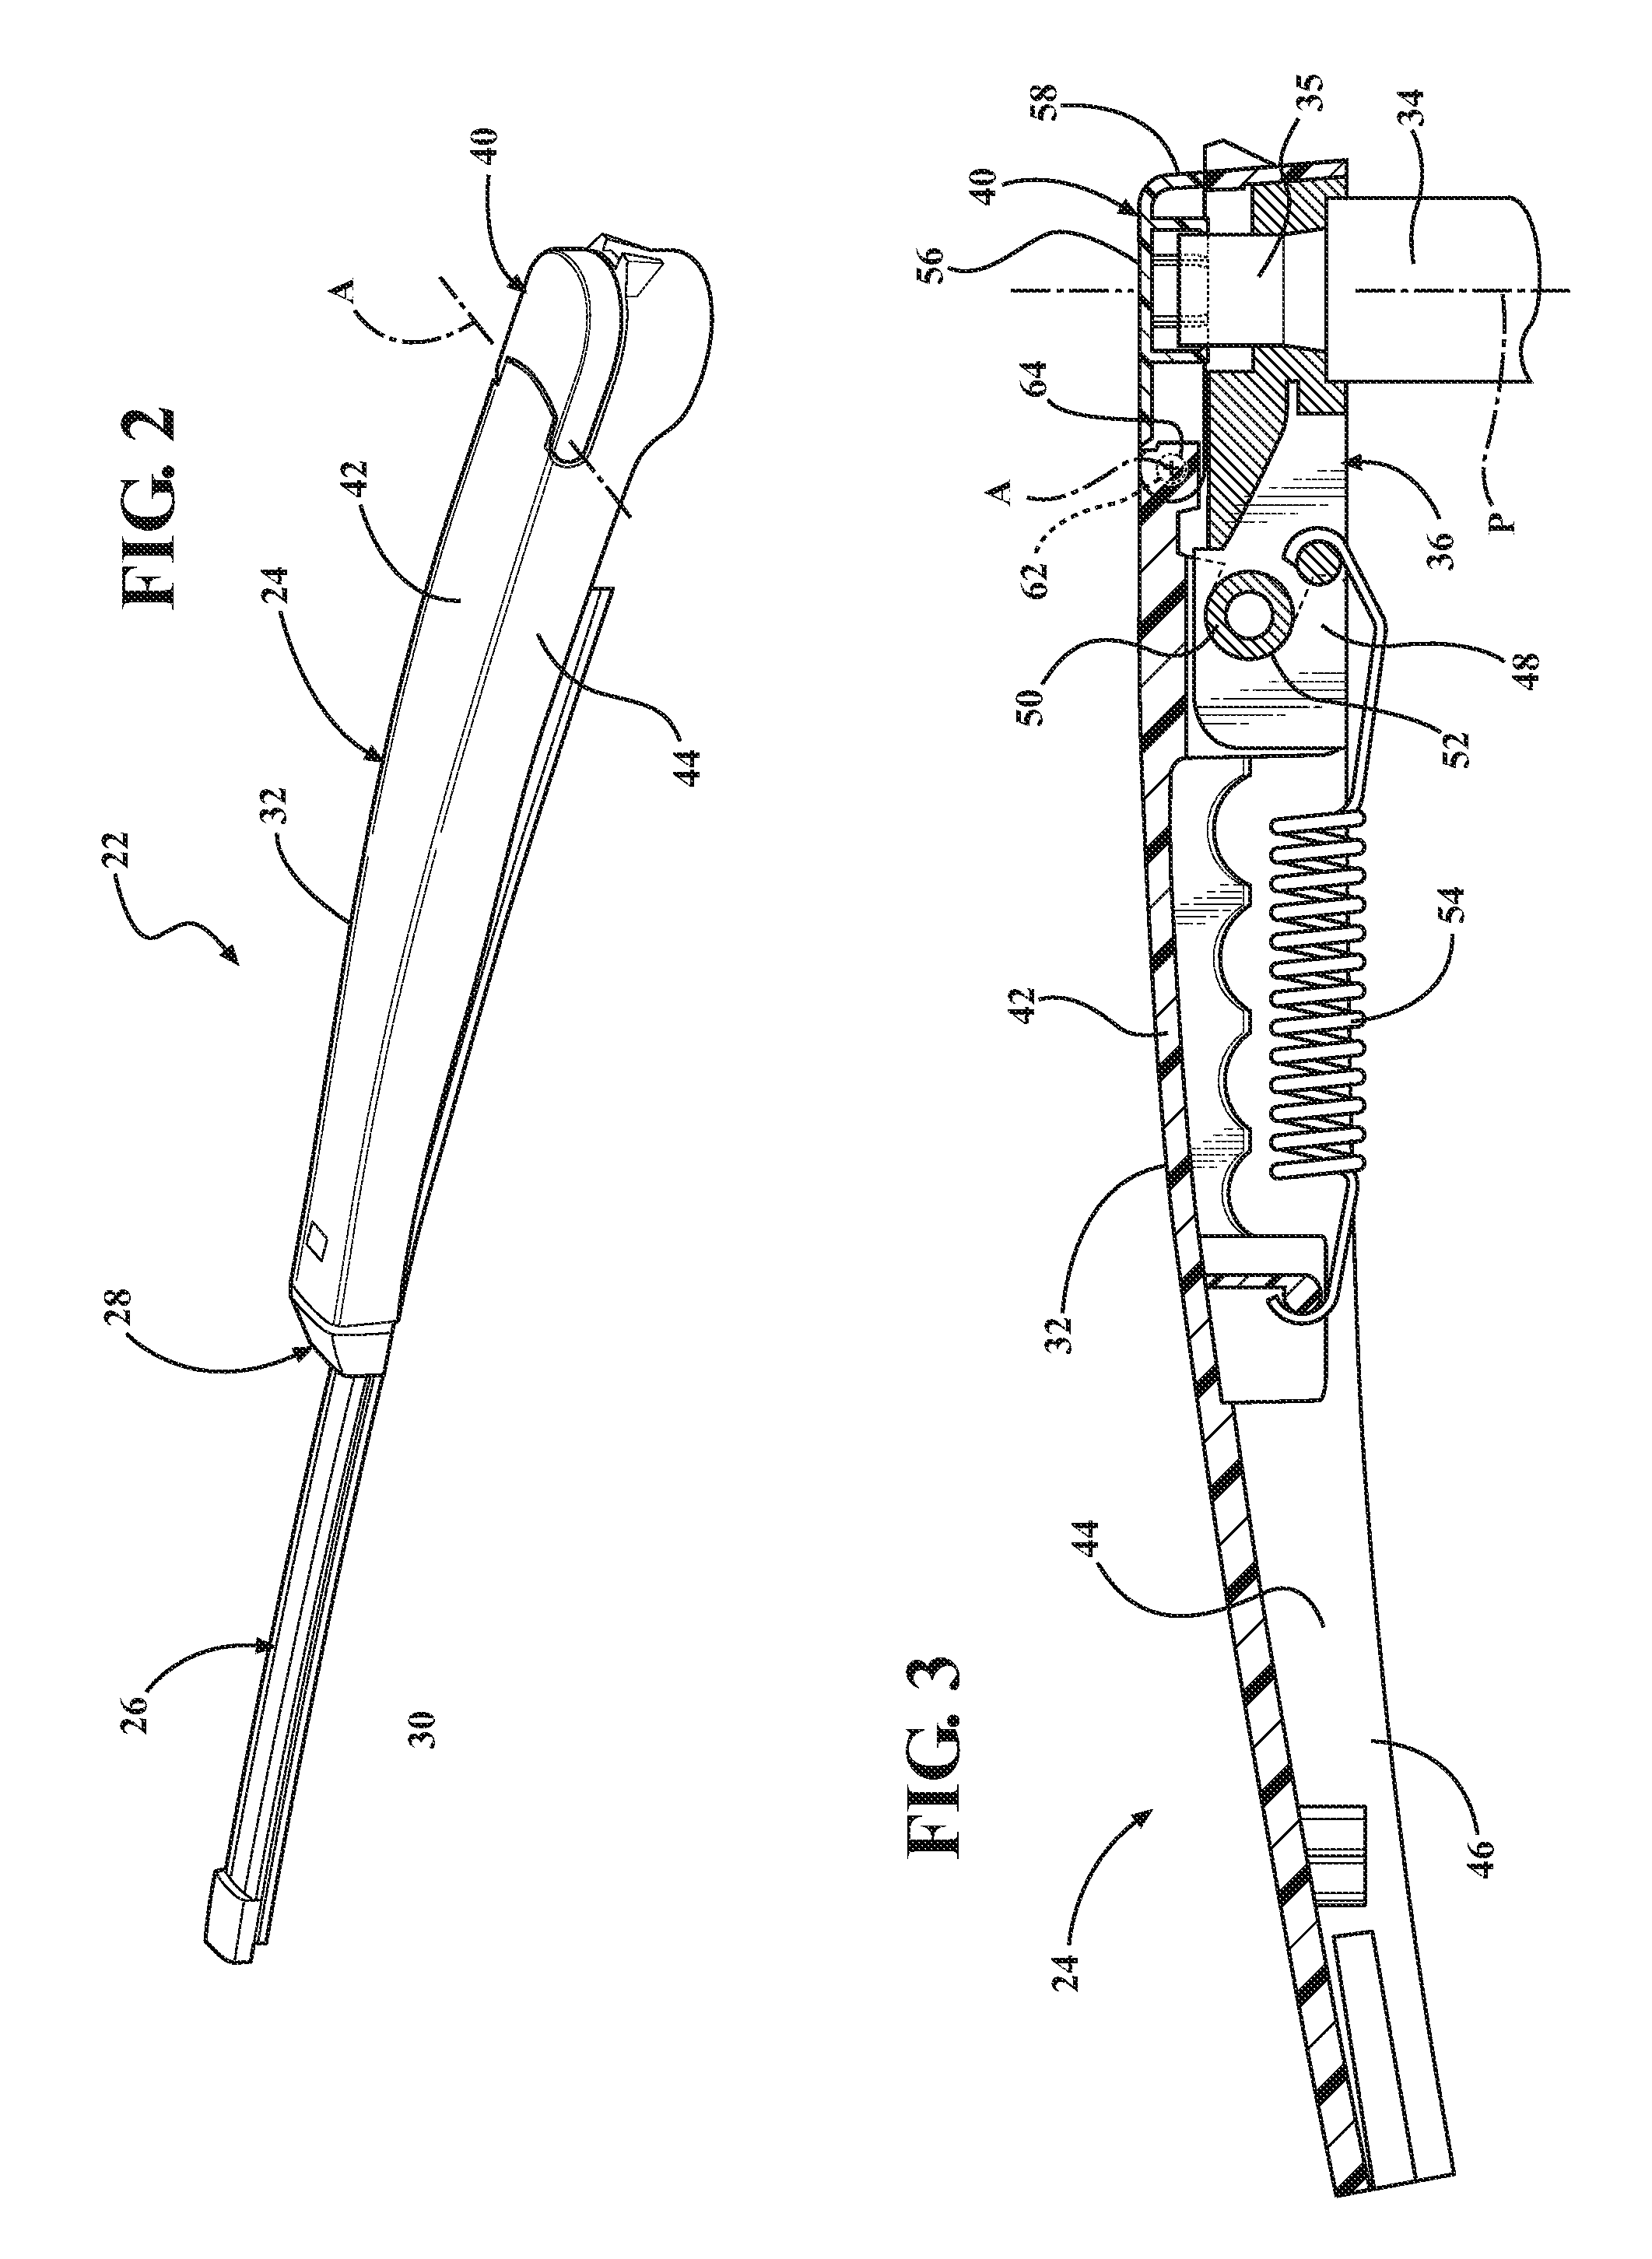 Wiper arm assembly having pivotal cover allowing access to pivot shaft